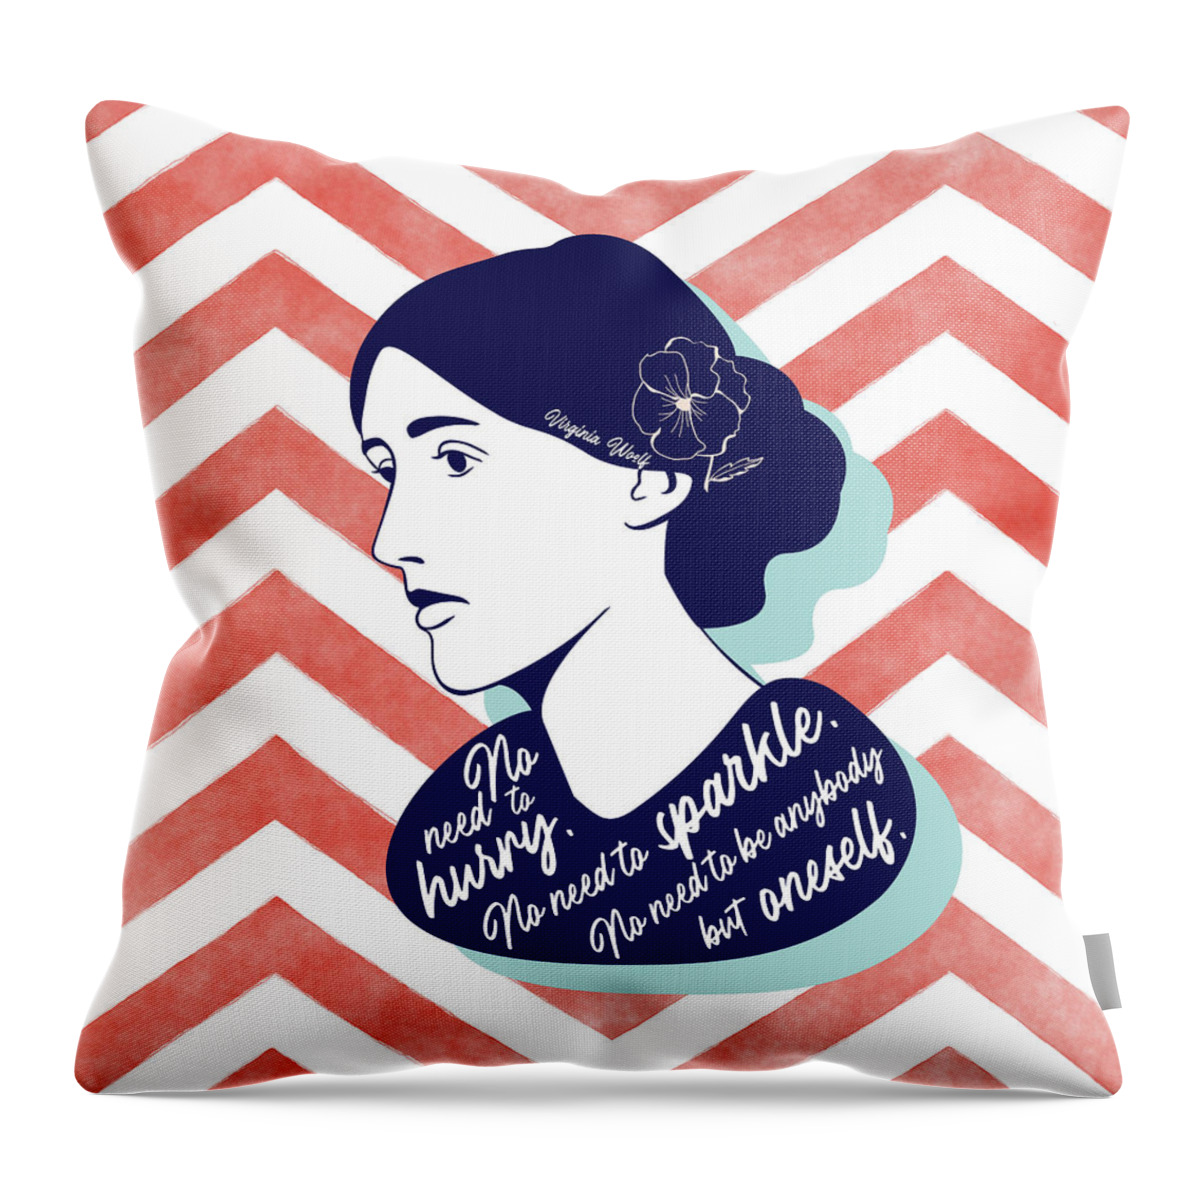 Virginia Wolf Throw Pillow featuring the digital art Virginia Woolf Graphic Quote by Ink Well